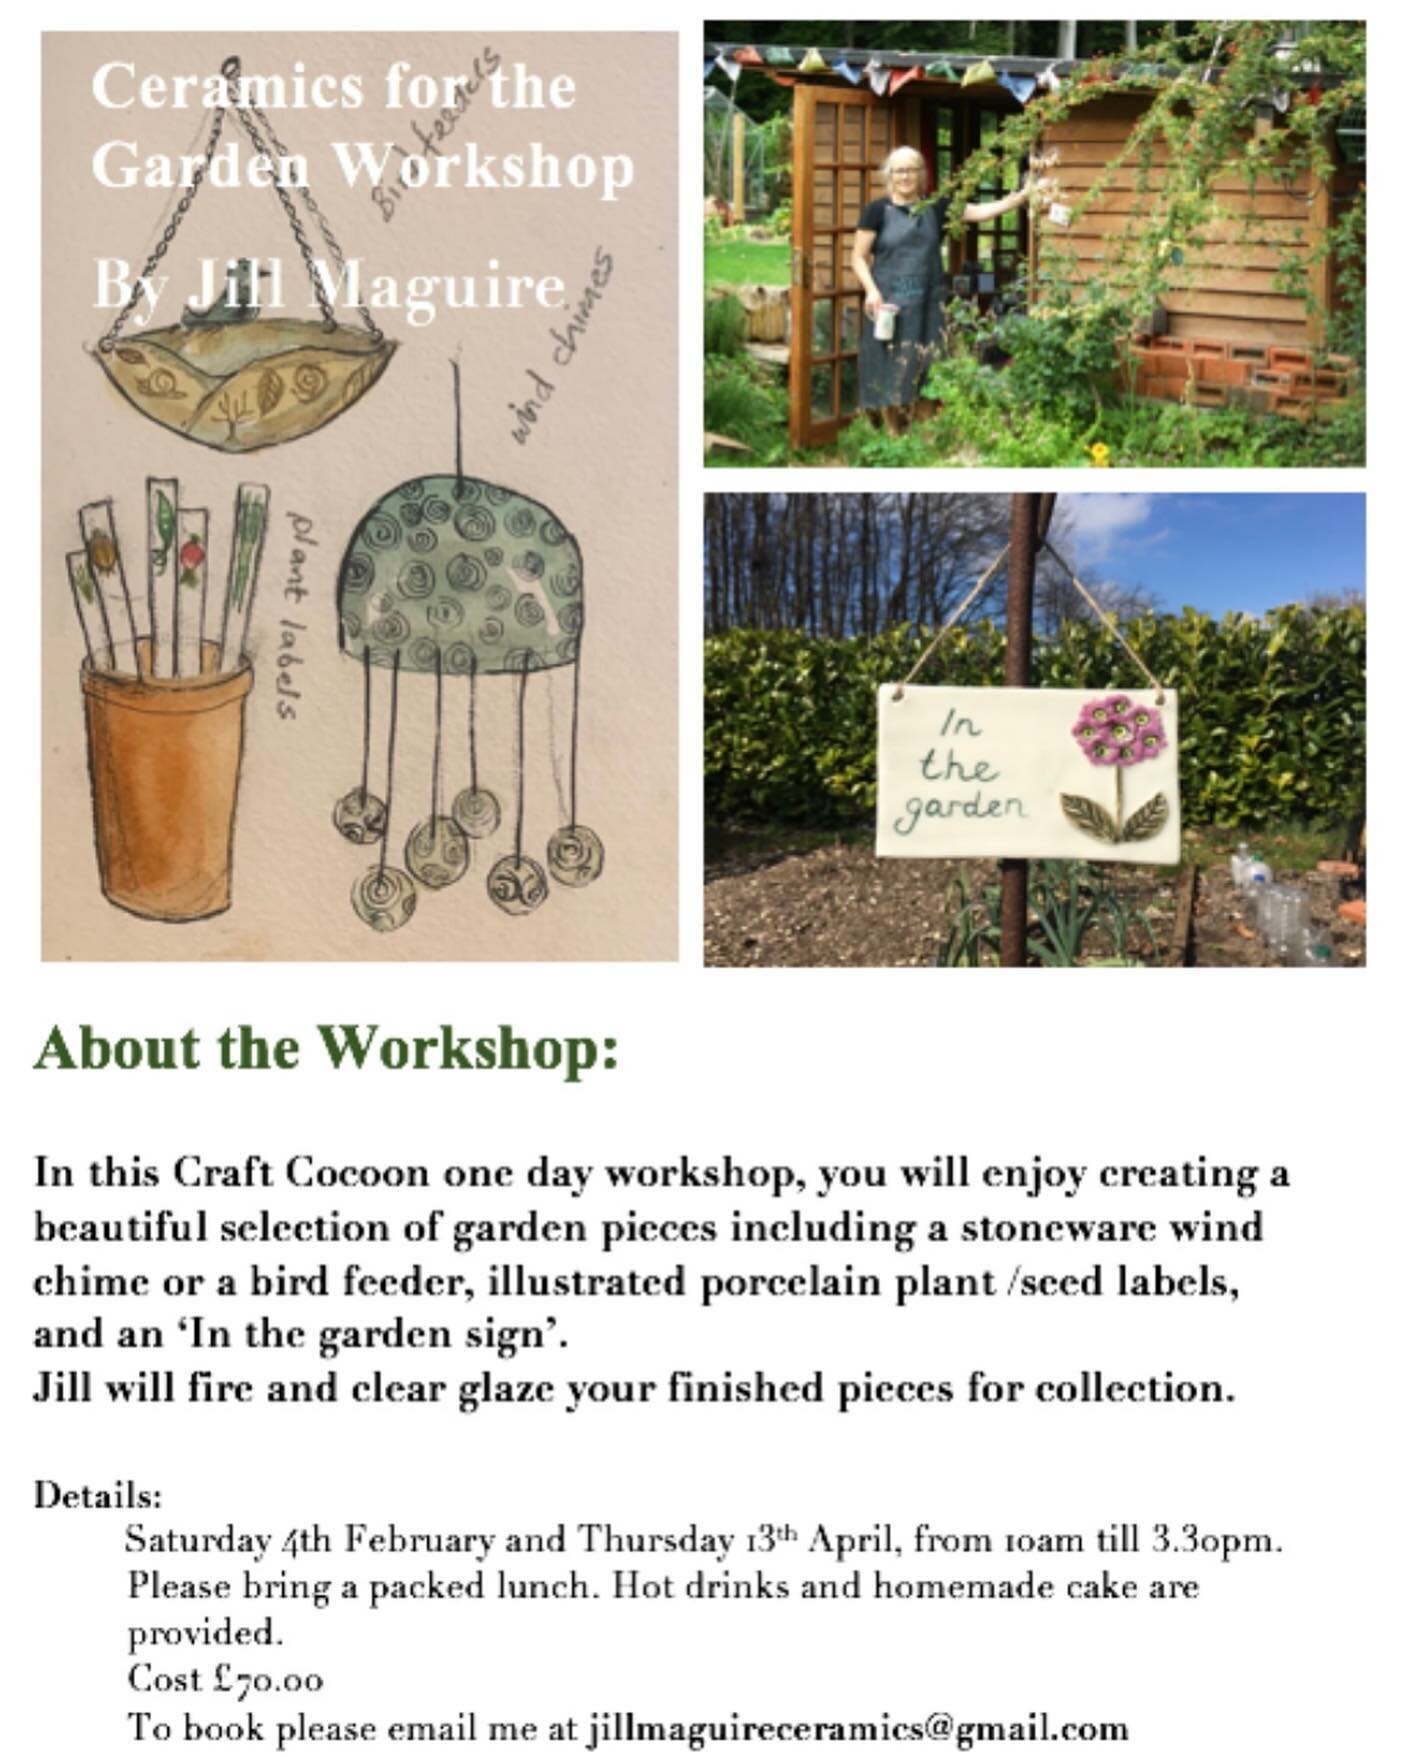 With spring arriving soon I hope you can join me for the next ceramic workshop which is Garden themed. It will be a full day of inspiration , fun and creativity. Please email or dm me to book . #ceramicworkshop #porcelainworkshop #gardencrafts #garde